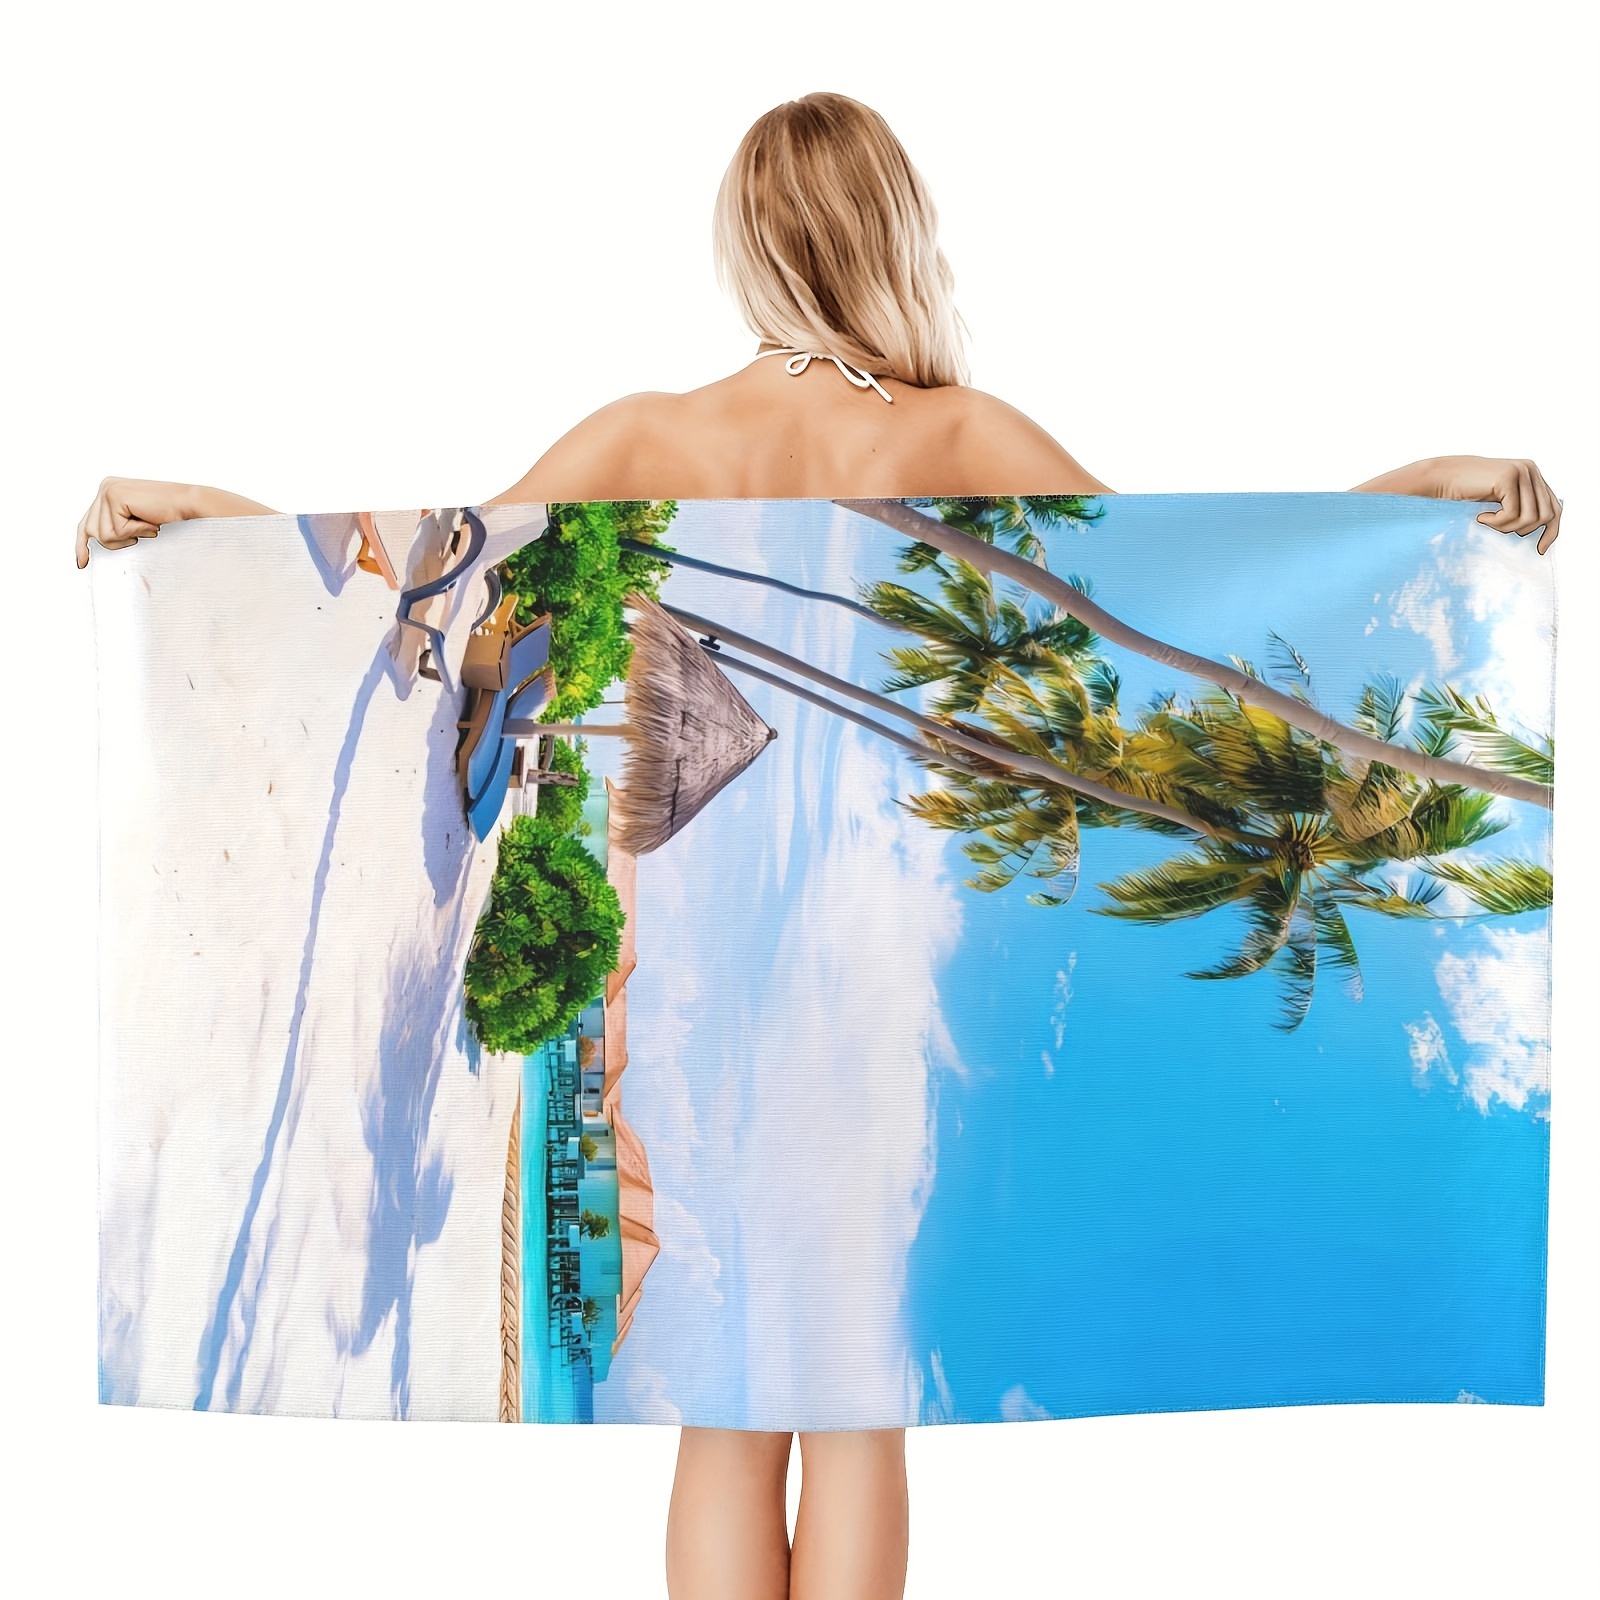 

1pc Beach Printed Beach Towel, Quick Drying Absorbent Beach Towel, Soft Comfortable Breathable Bath Towel, For Outdoor Travel Camping Beach Vacation, Beach Essentials